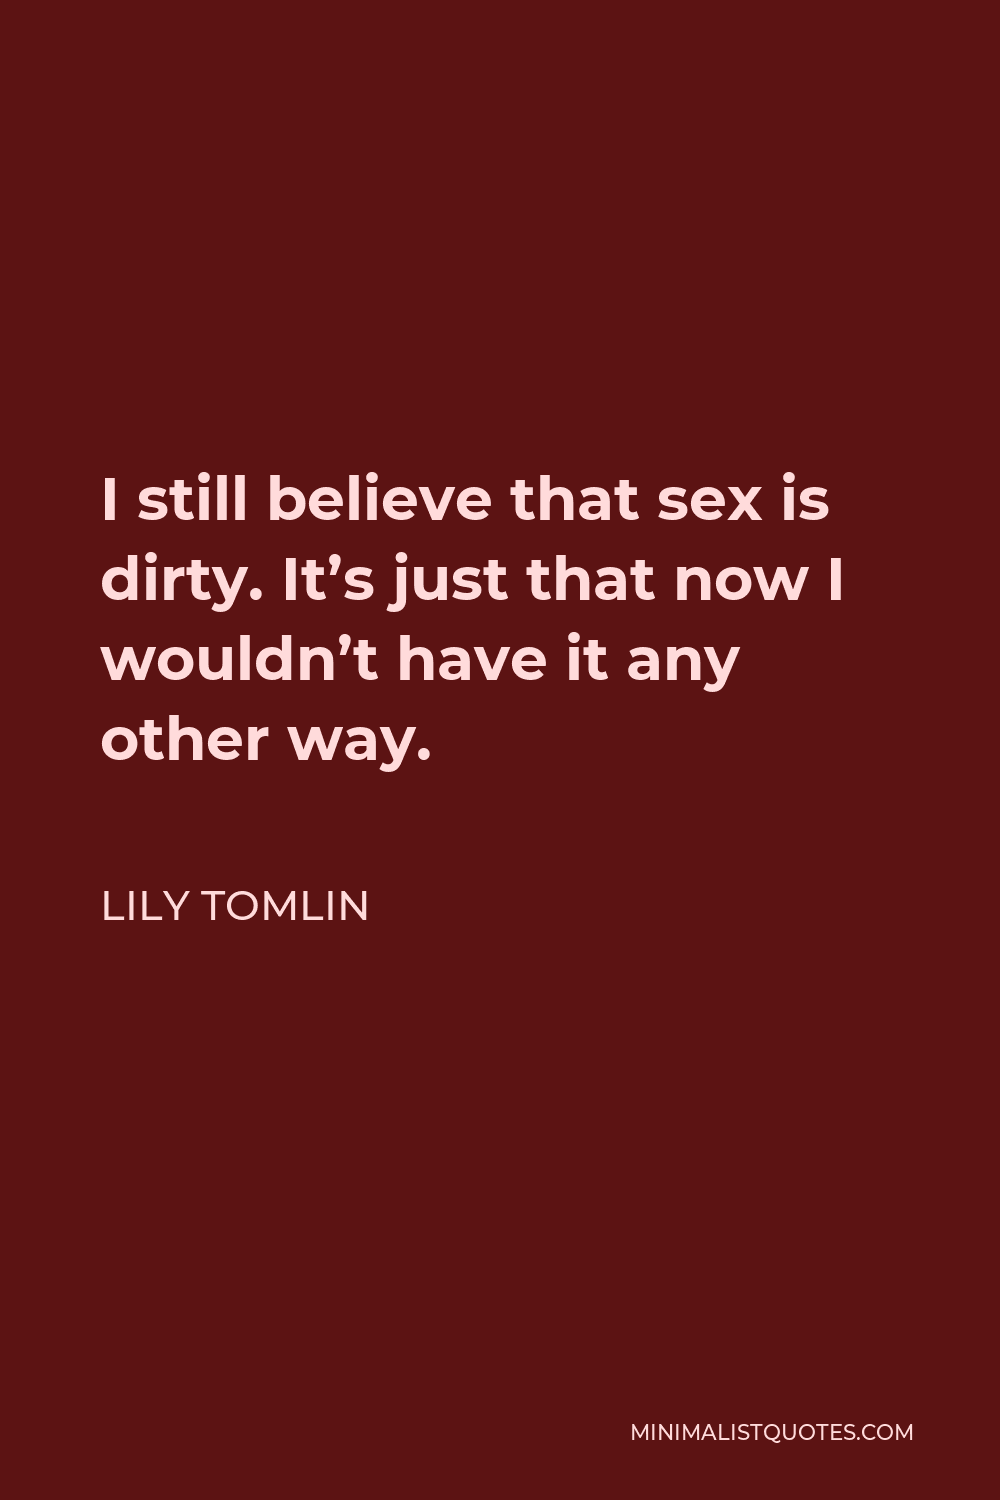 Lily Tomlin Quote - I still believe that sex is dirty. It’s just that now I wouldn’t have it any other way.